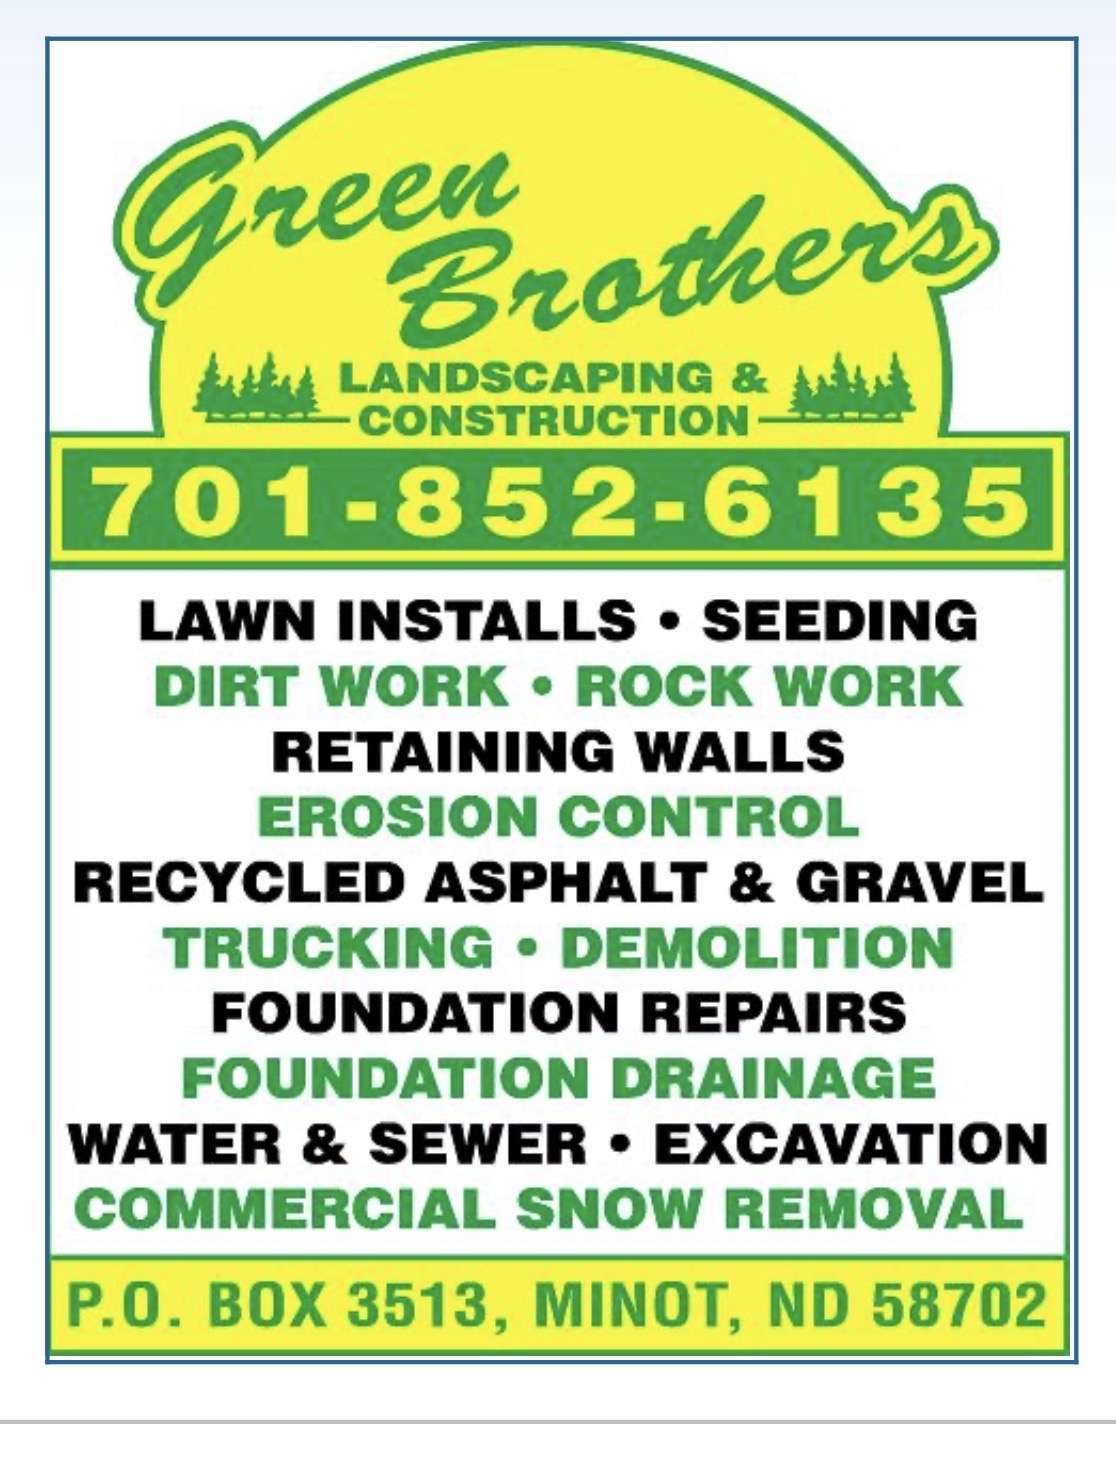 Green Brothers Landscaping & Construction Logo